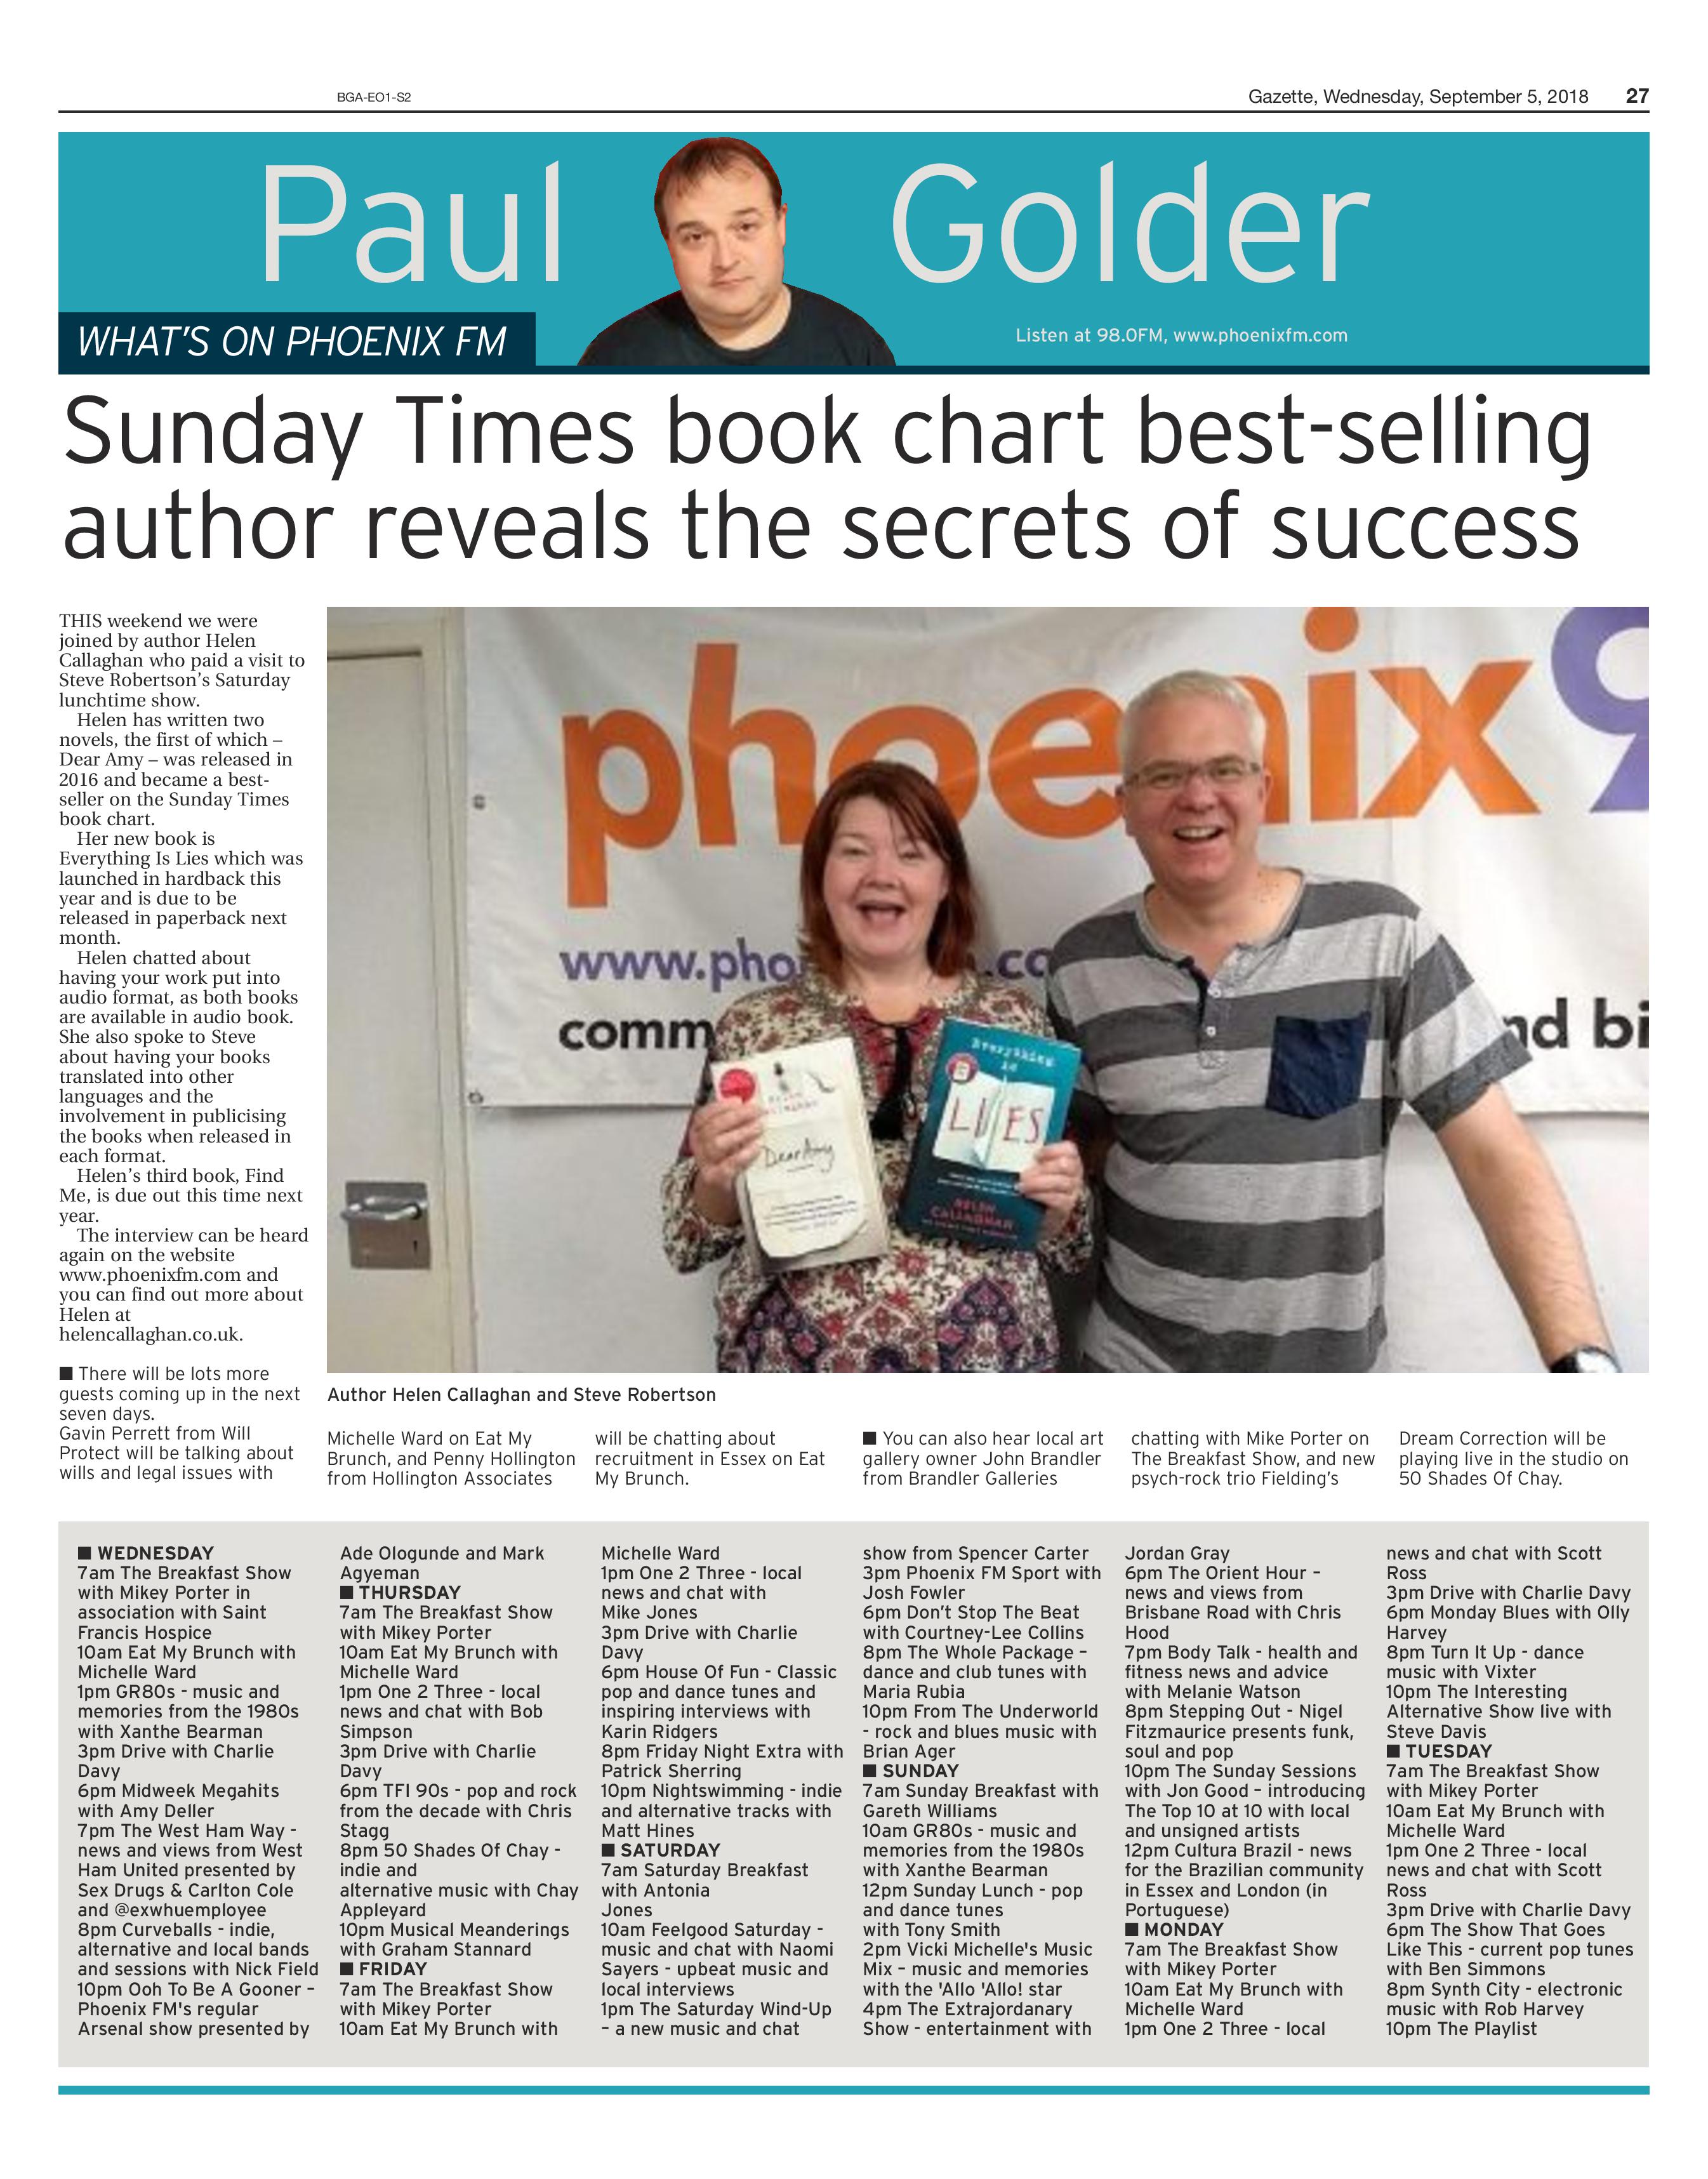 Sunday Times book chart bestselling author reveals the secrets of